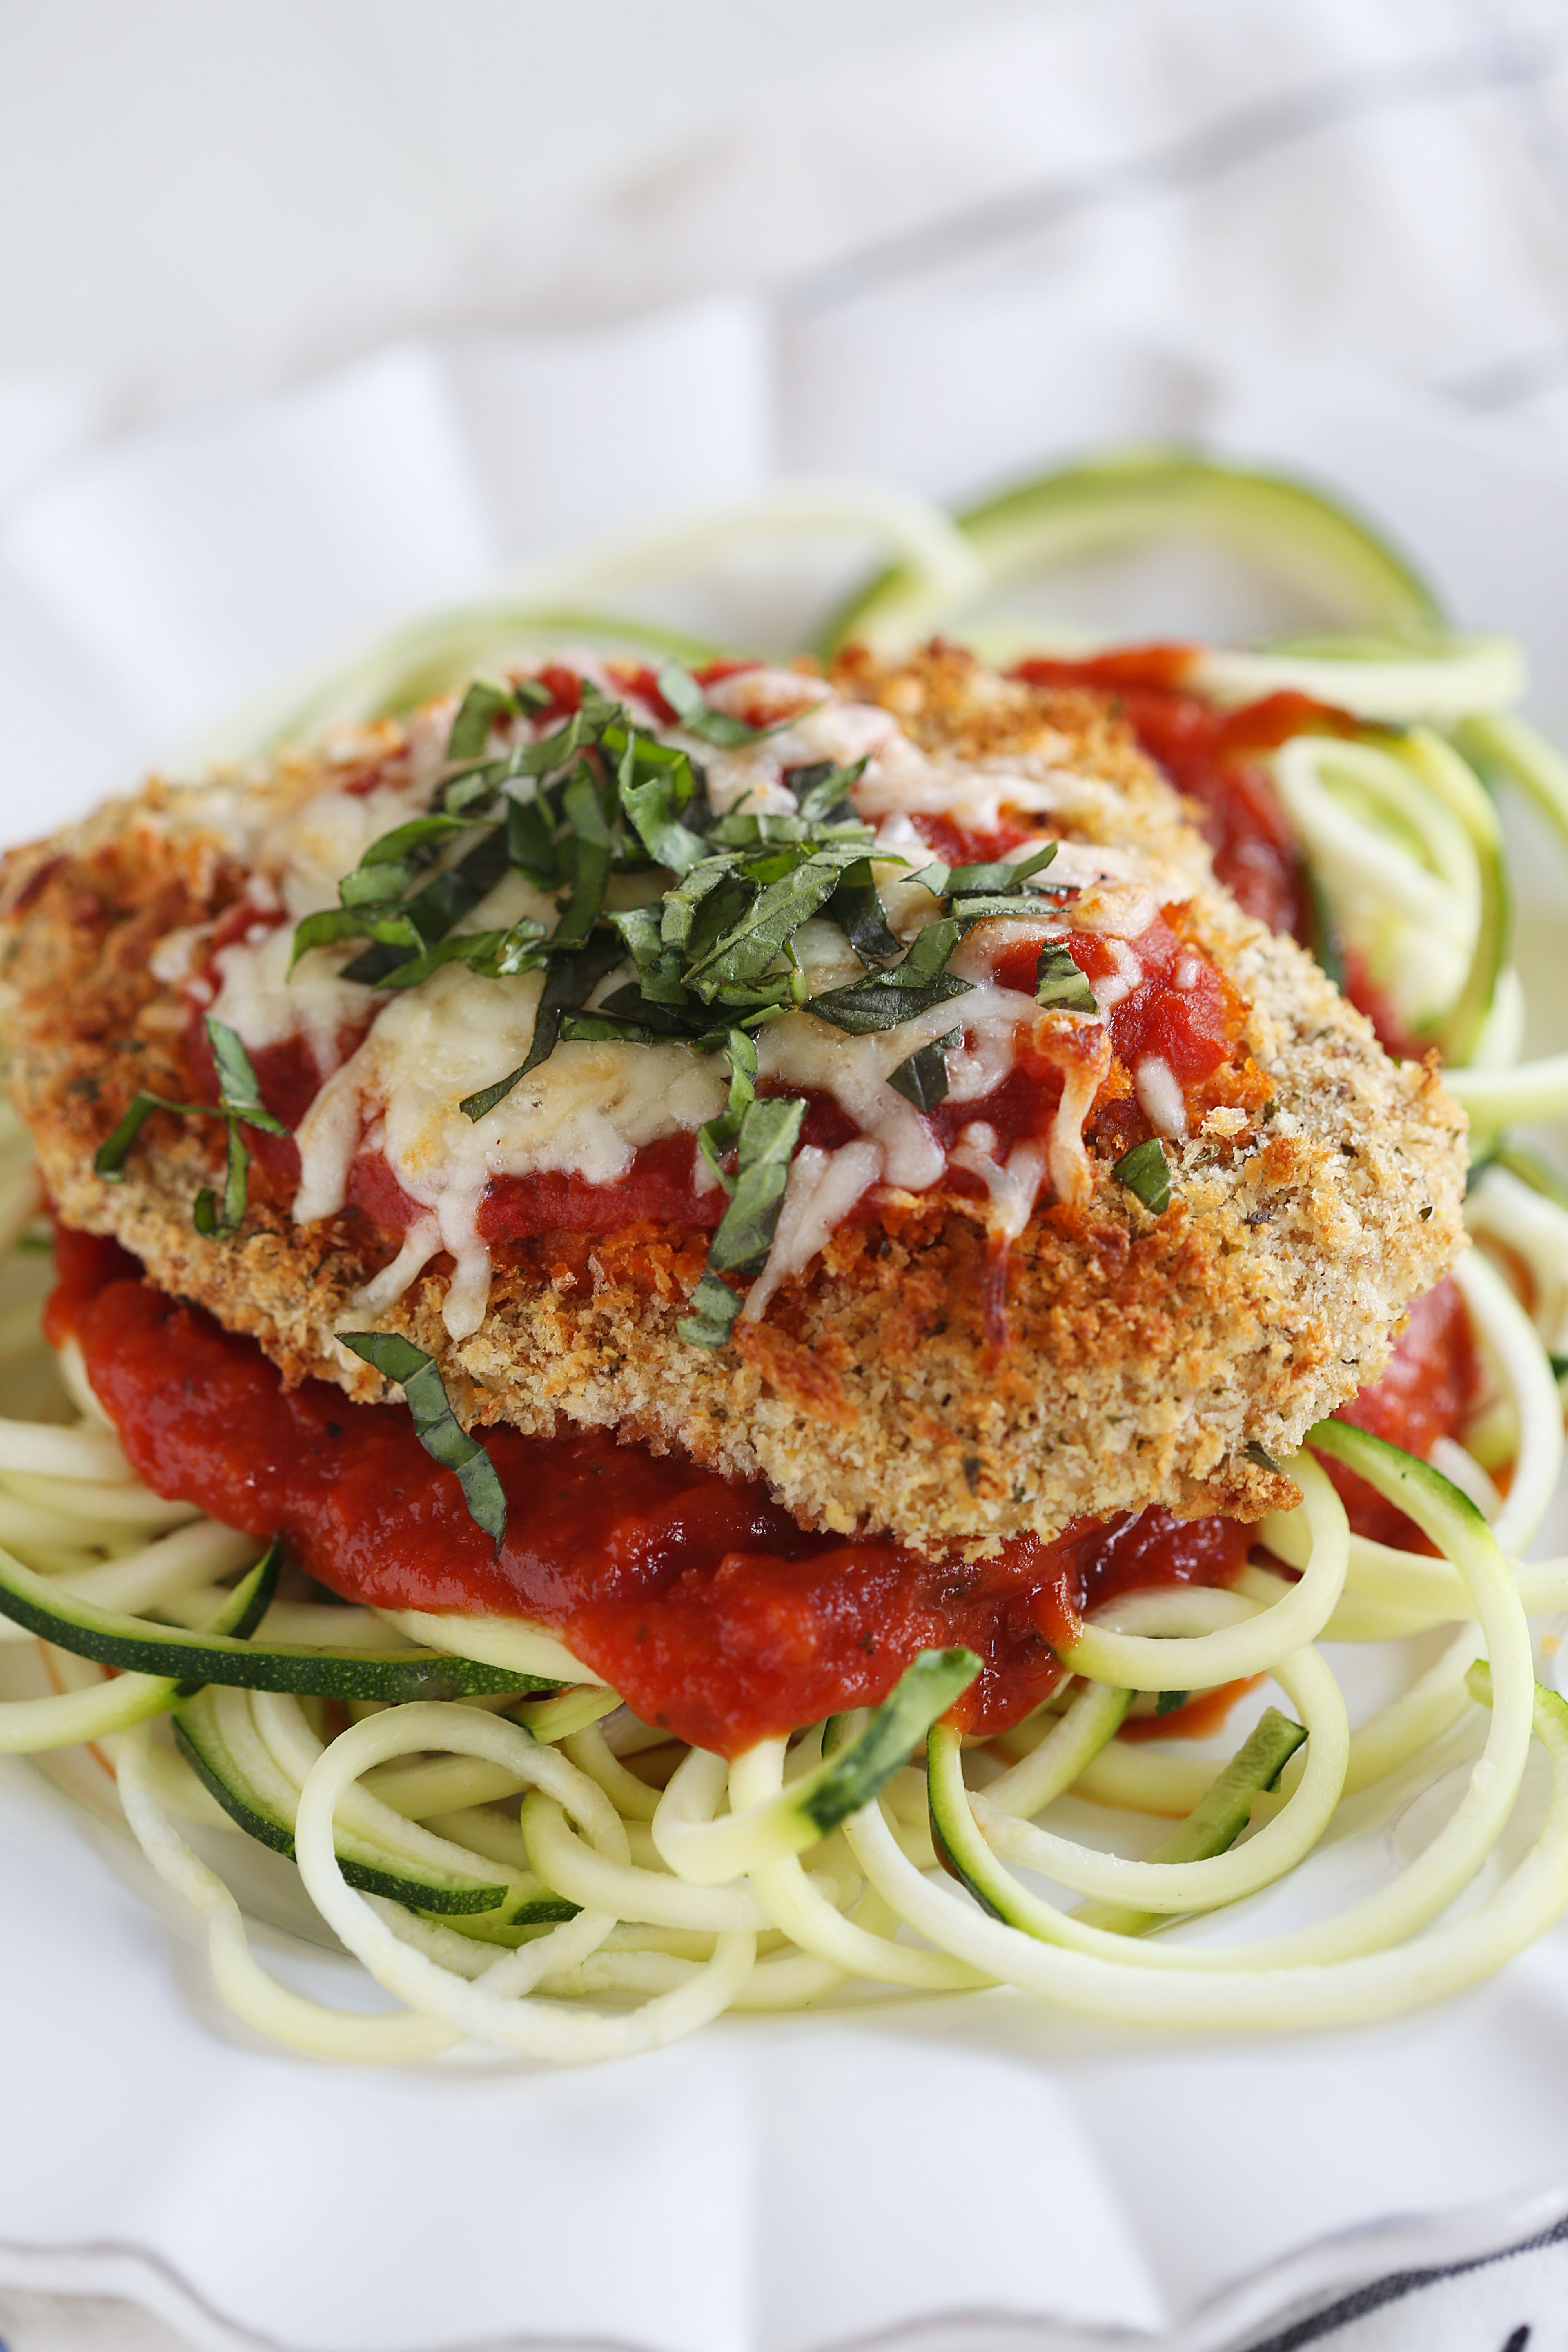 This recipe for Baked Chicken Parmesan with Zucchini Noodles is healthy, delicious and can easily be made in just 30 minutes or less!